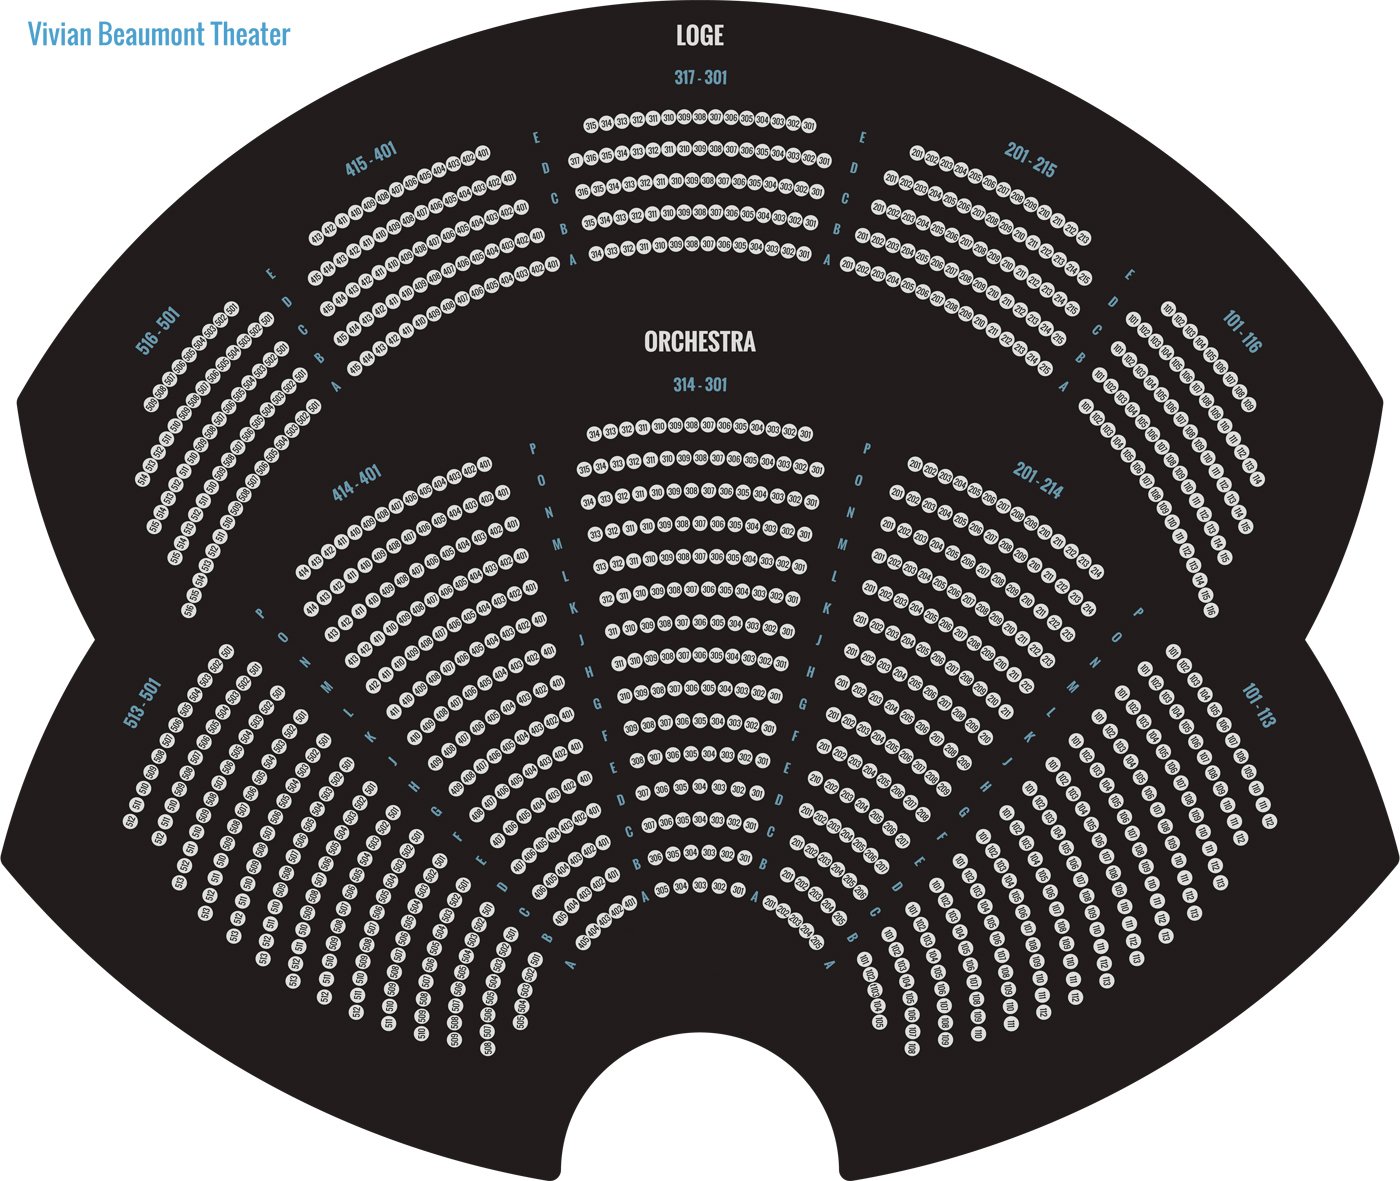 Vivian Beaumont Theater General Seating Chart